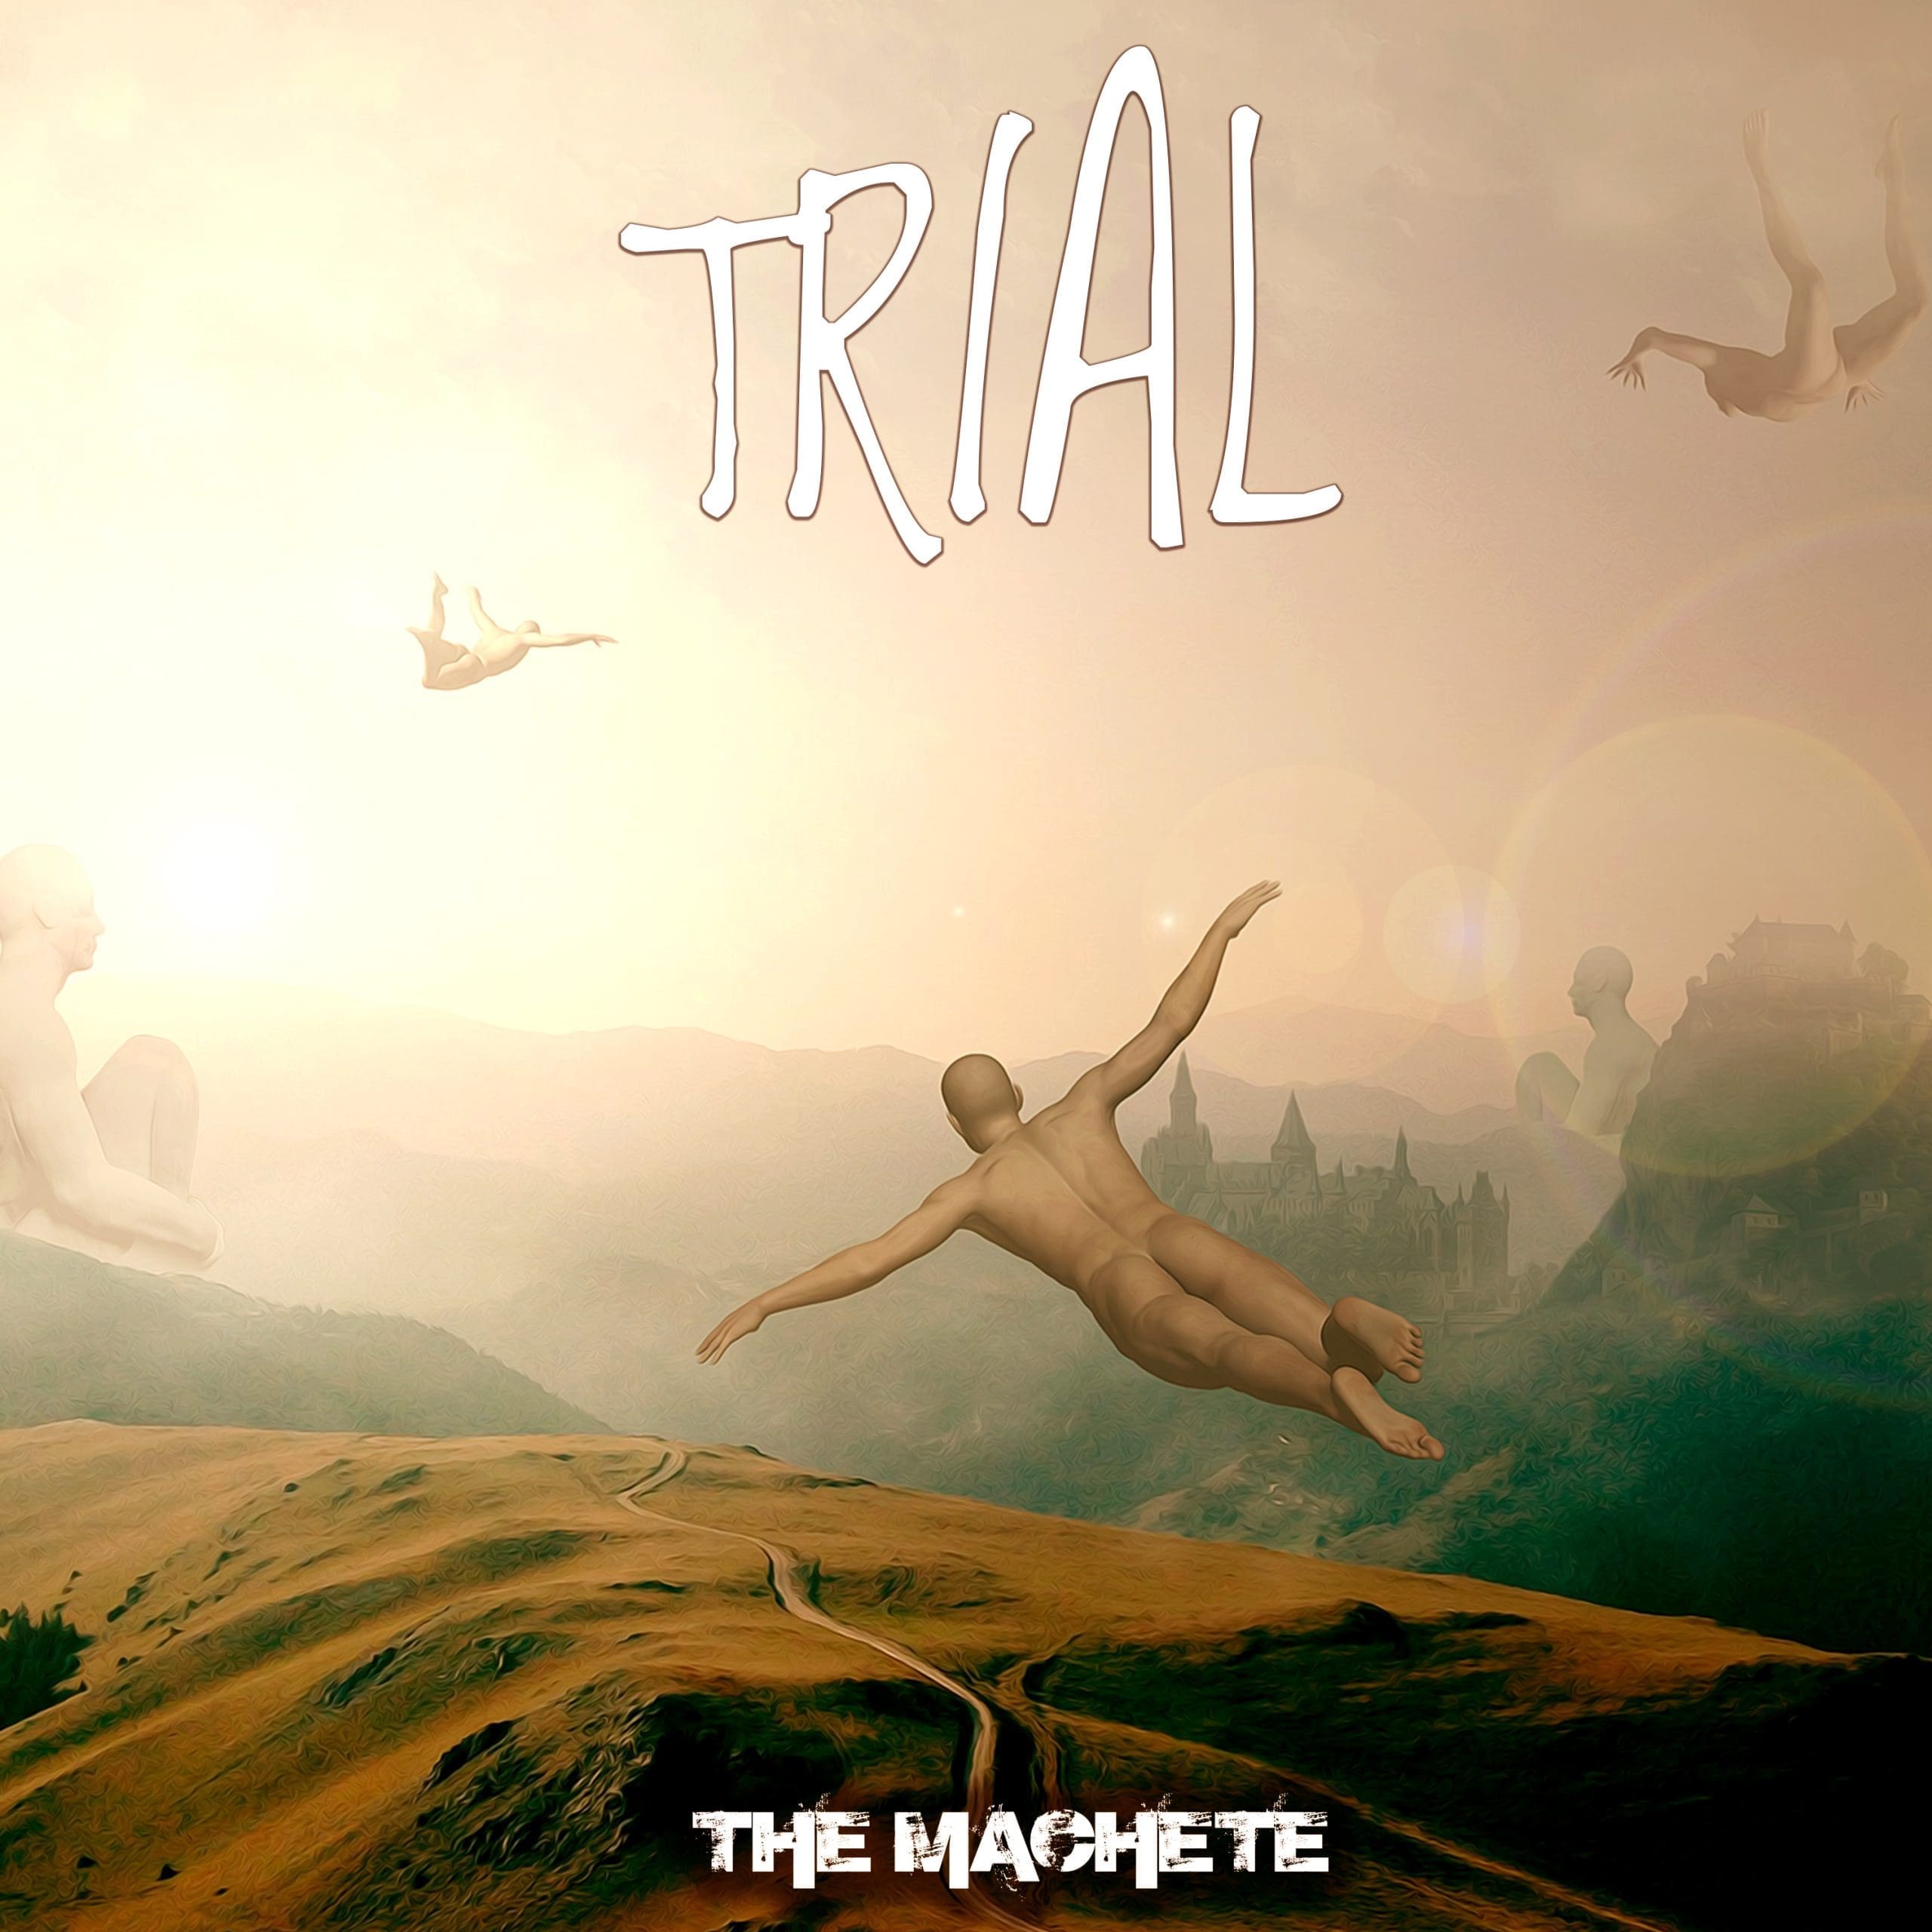 TRIAL FLY